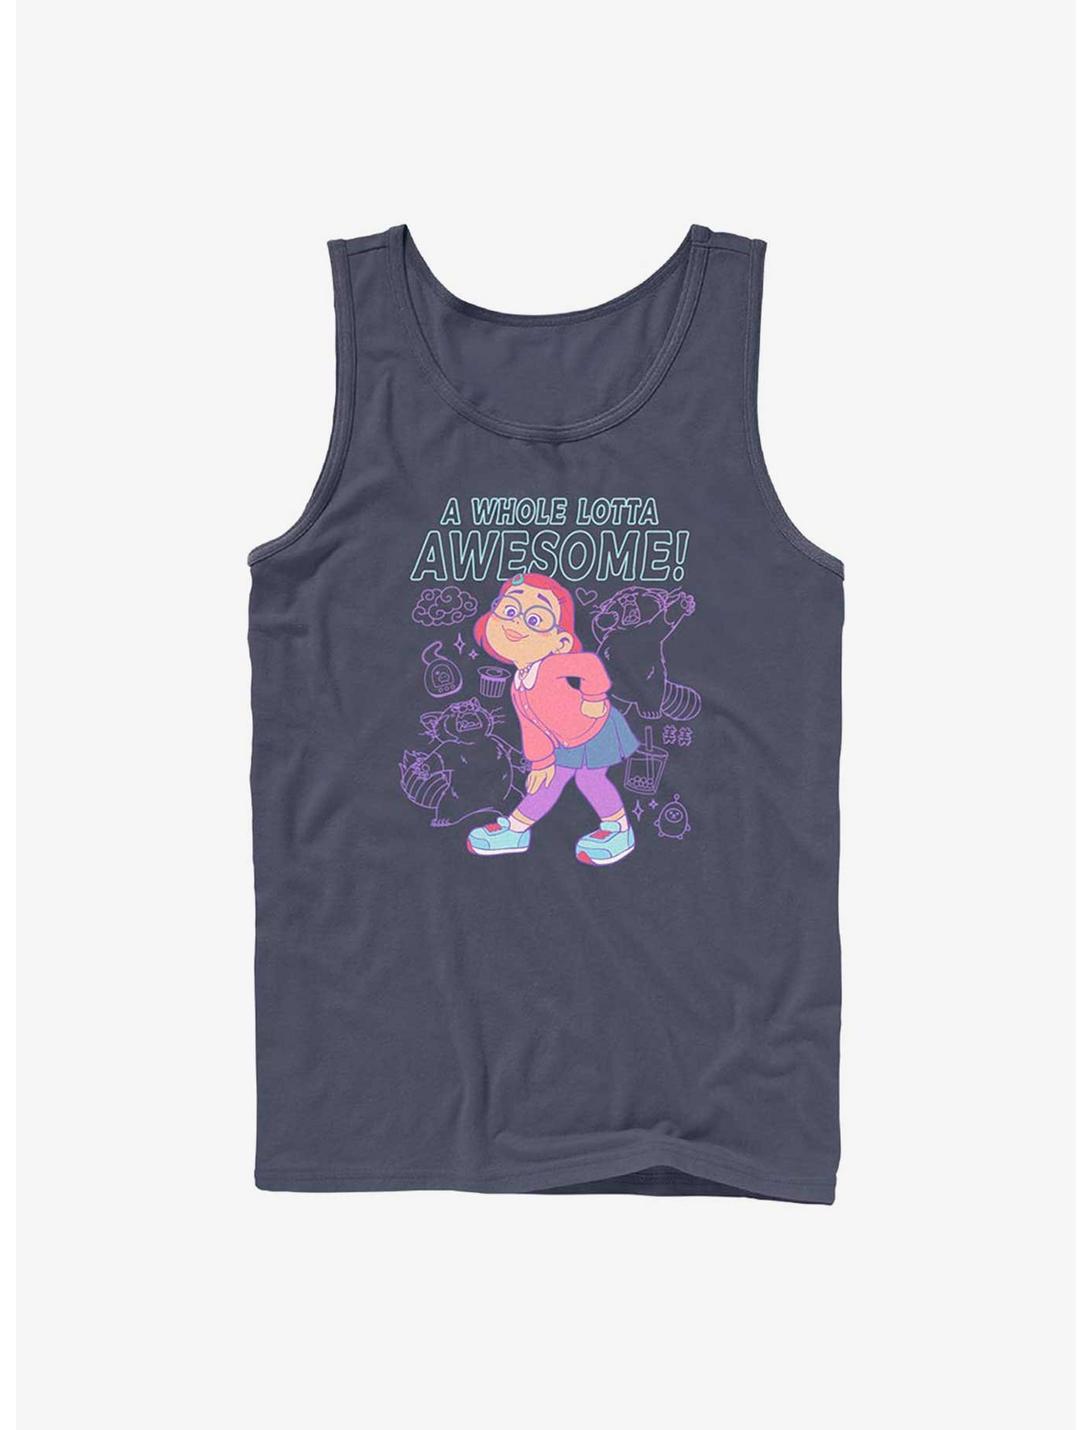 Disney Pixar Turning Red A Whole Lotta Awesome Tank, NAVY, hi-res